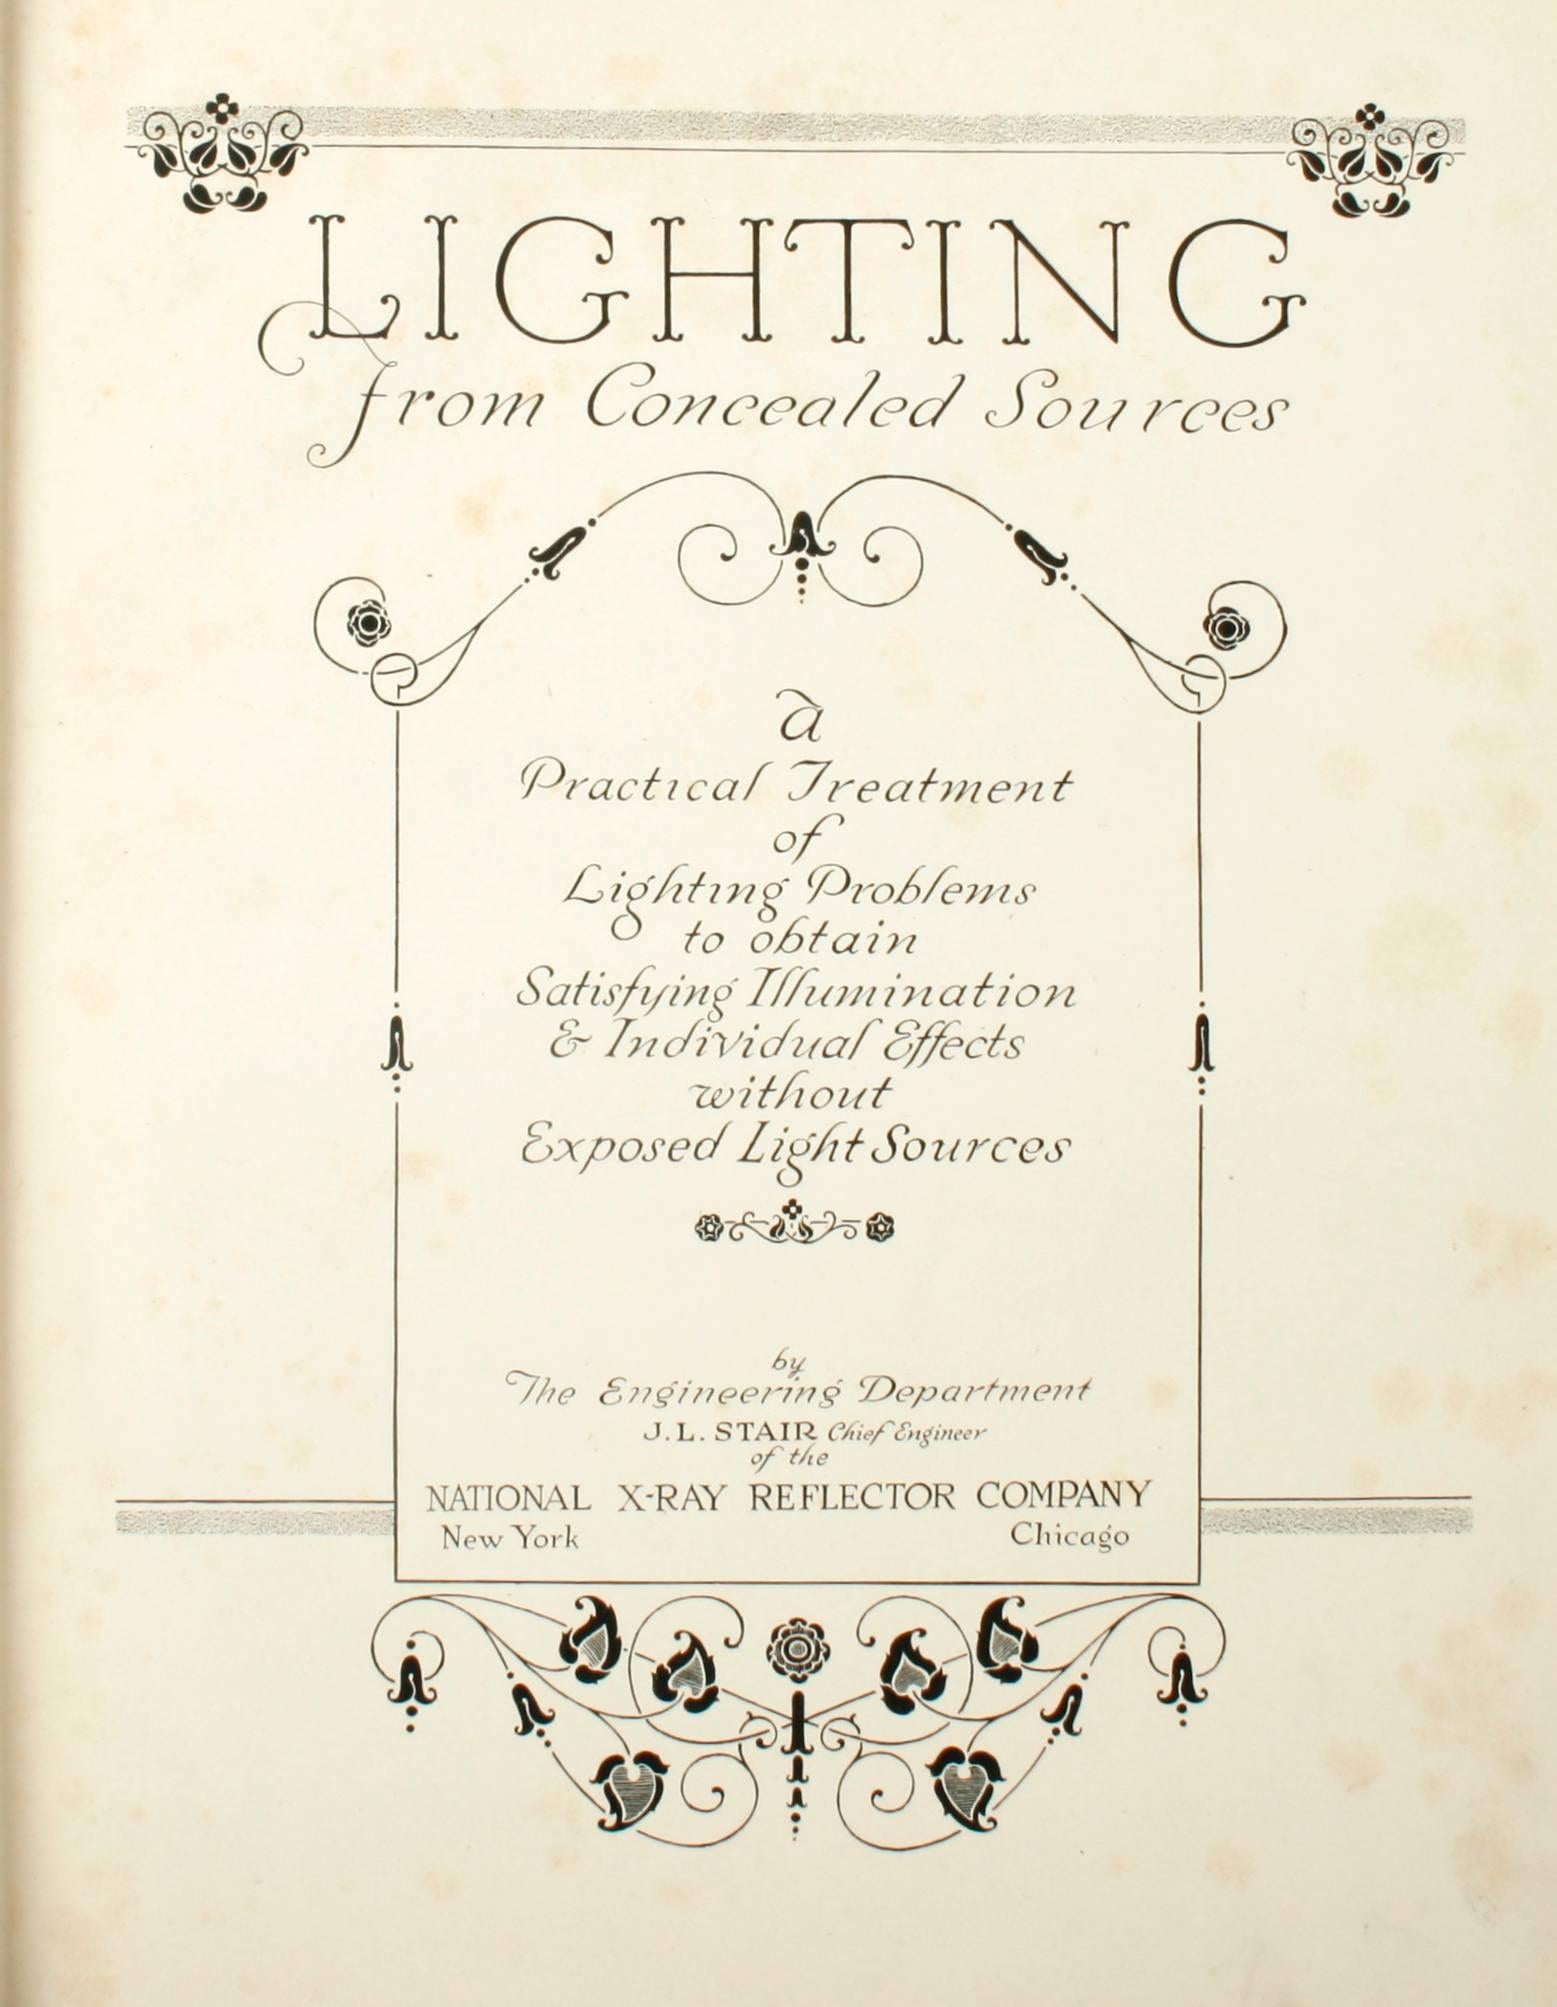 Lighting from concealed sources. New York: National X-Ray Reflector Company, 1919. First edition hardcover. 246 pp. An early guide to the satisfying effects of indirect lighting by J.L. Stair, the chief engineer of the National X-Ray Reflector